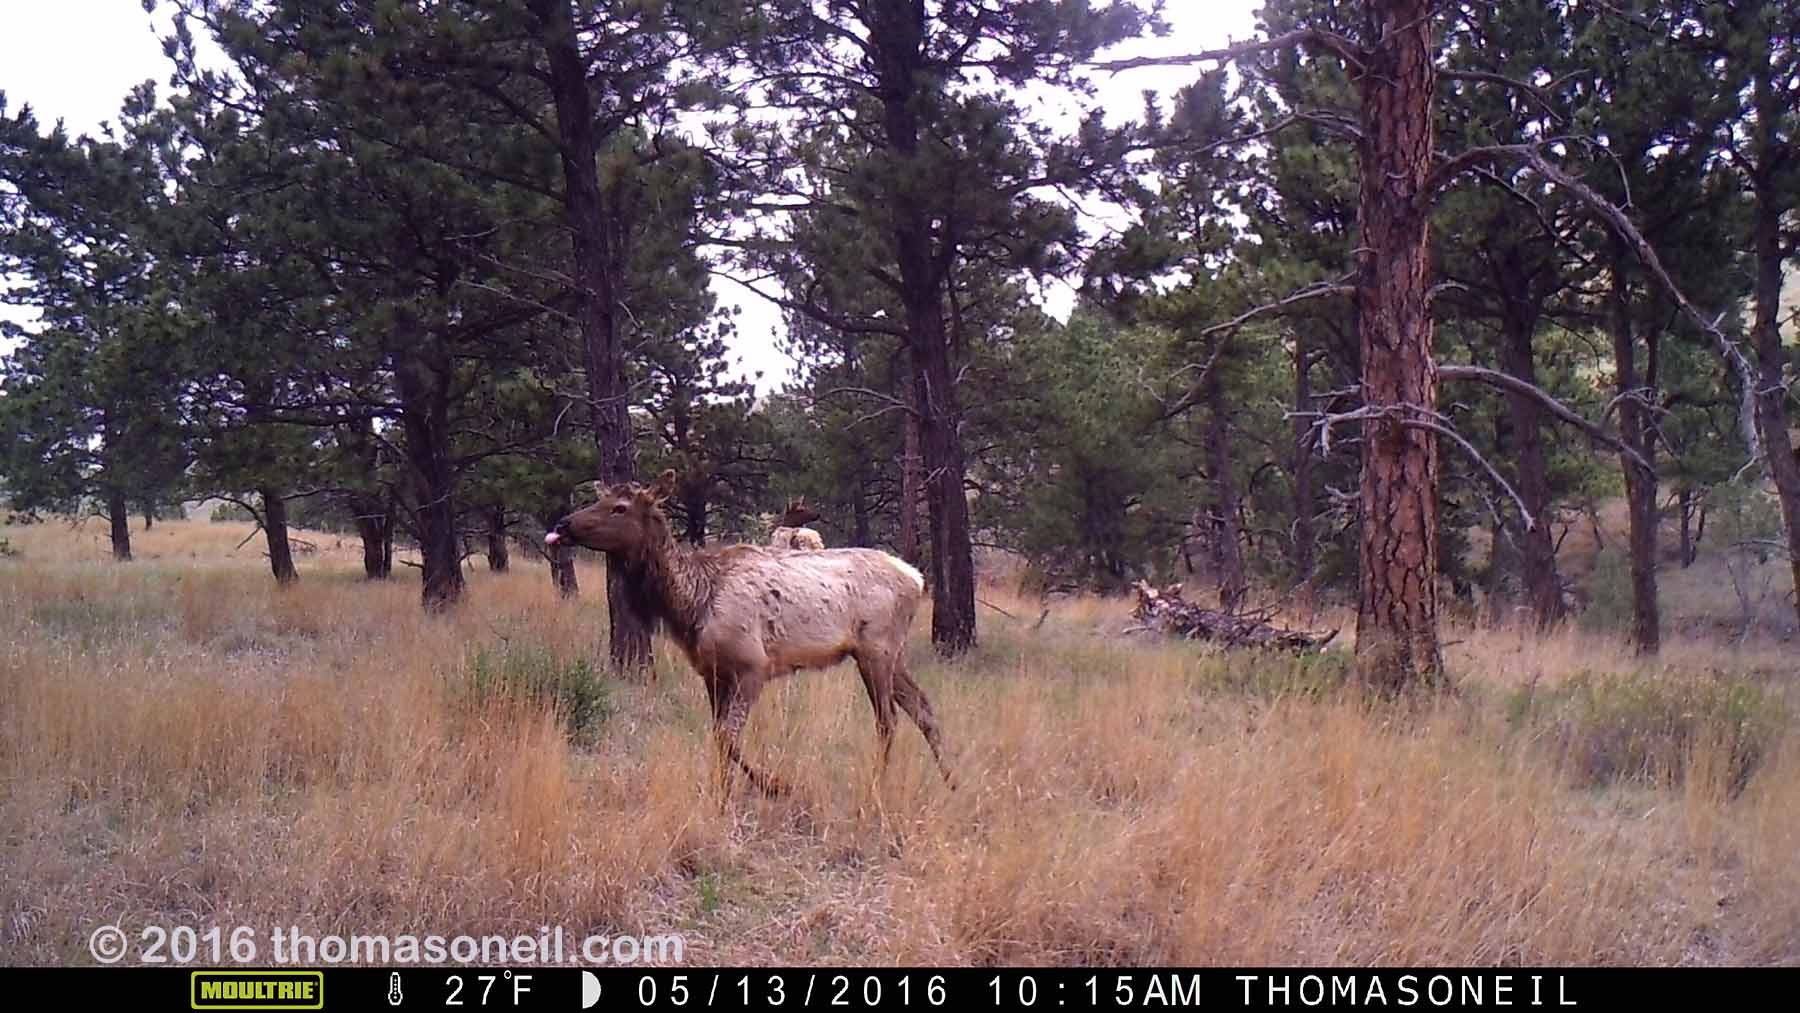 Elk on Moultrie trailcam, Wind Cave National Park, May 13, 2016.  Compare to following image on Primos trailcam.